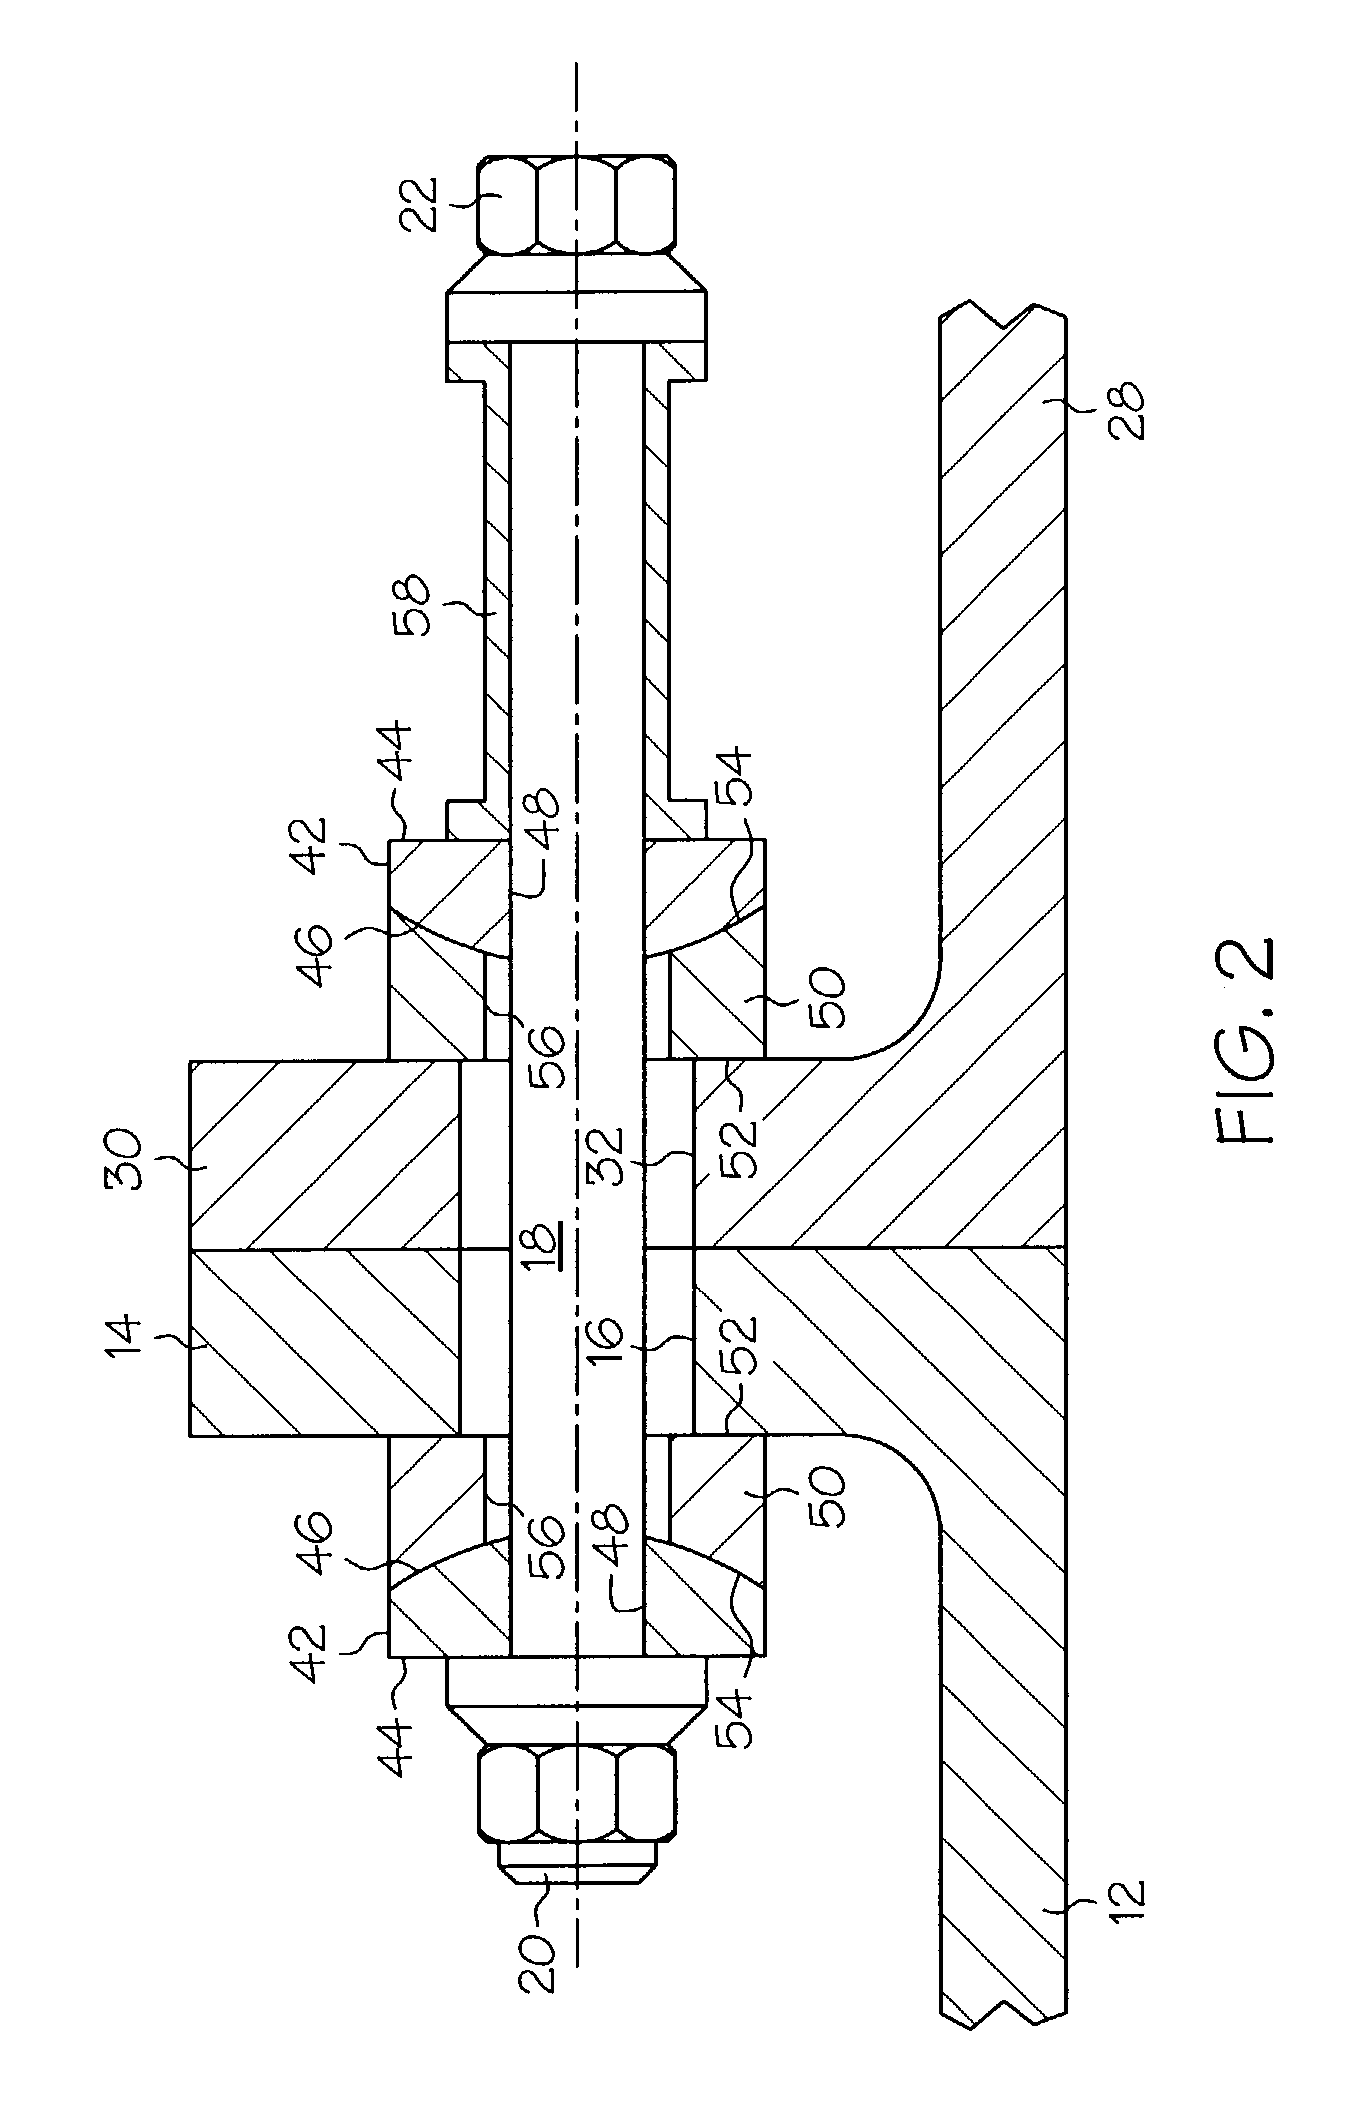 Bolting arrangement including a two-piece washer for minimizing bolt bending